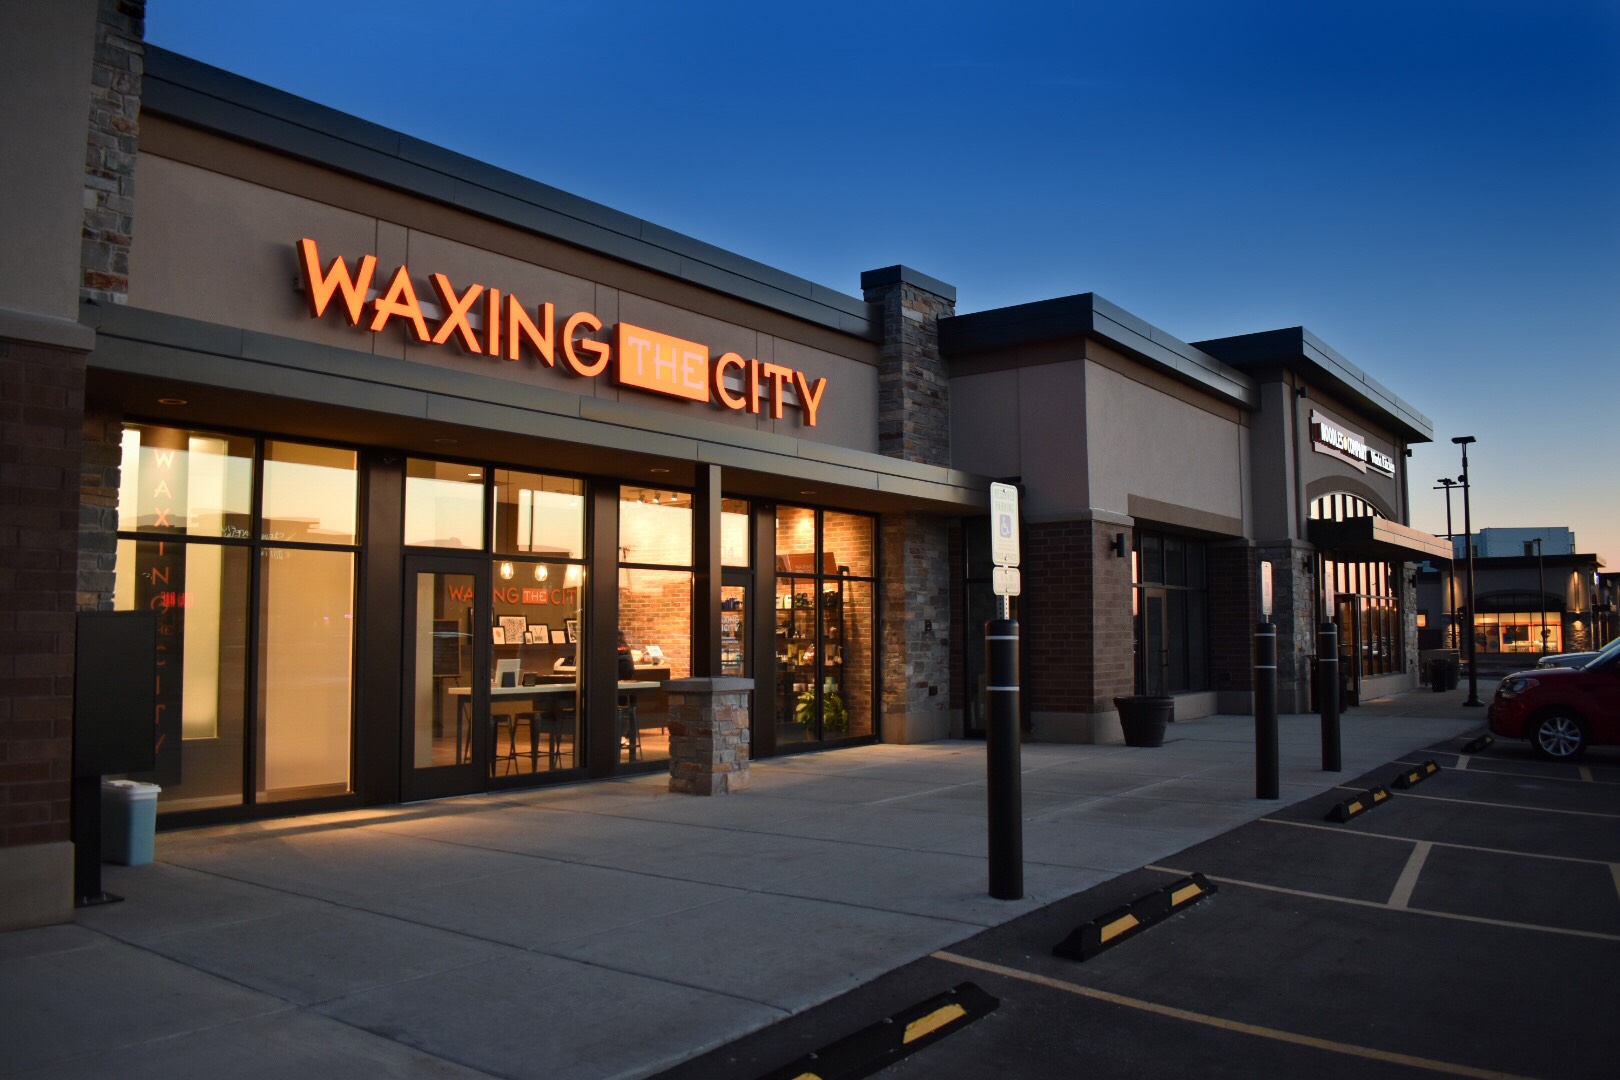 Waxing the city store front